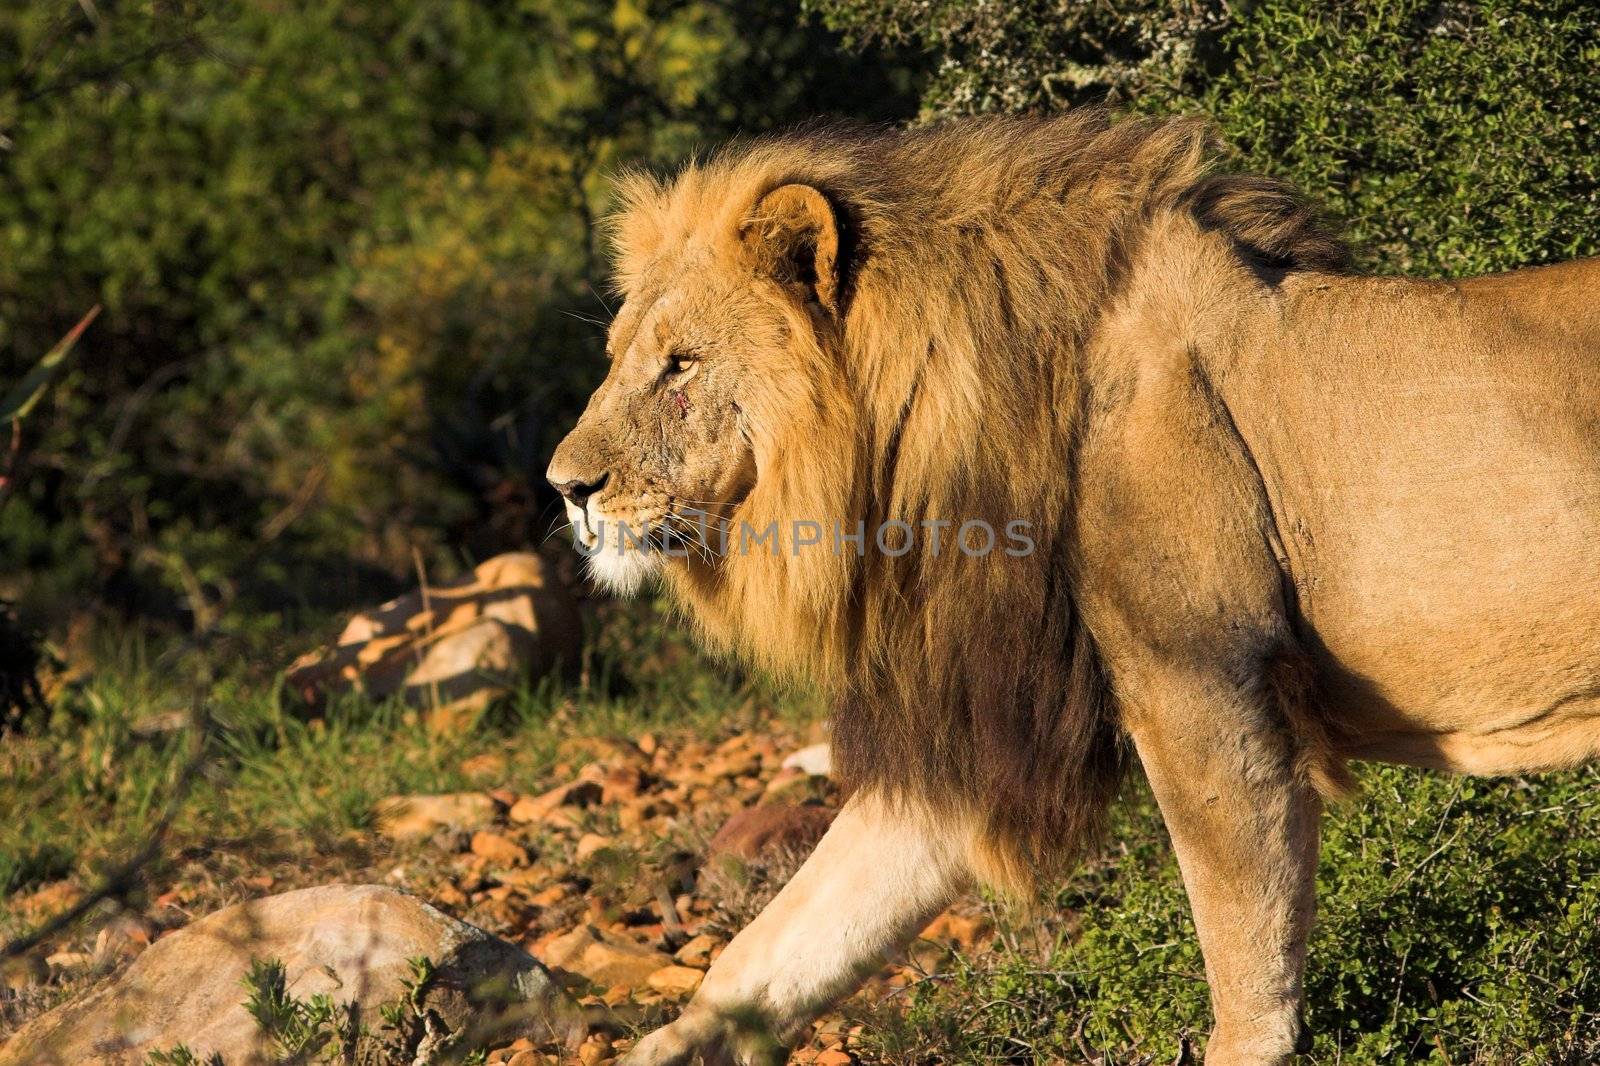 Male Lion walking with a scar after a battle by nightowlza